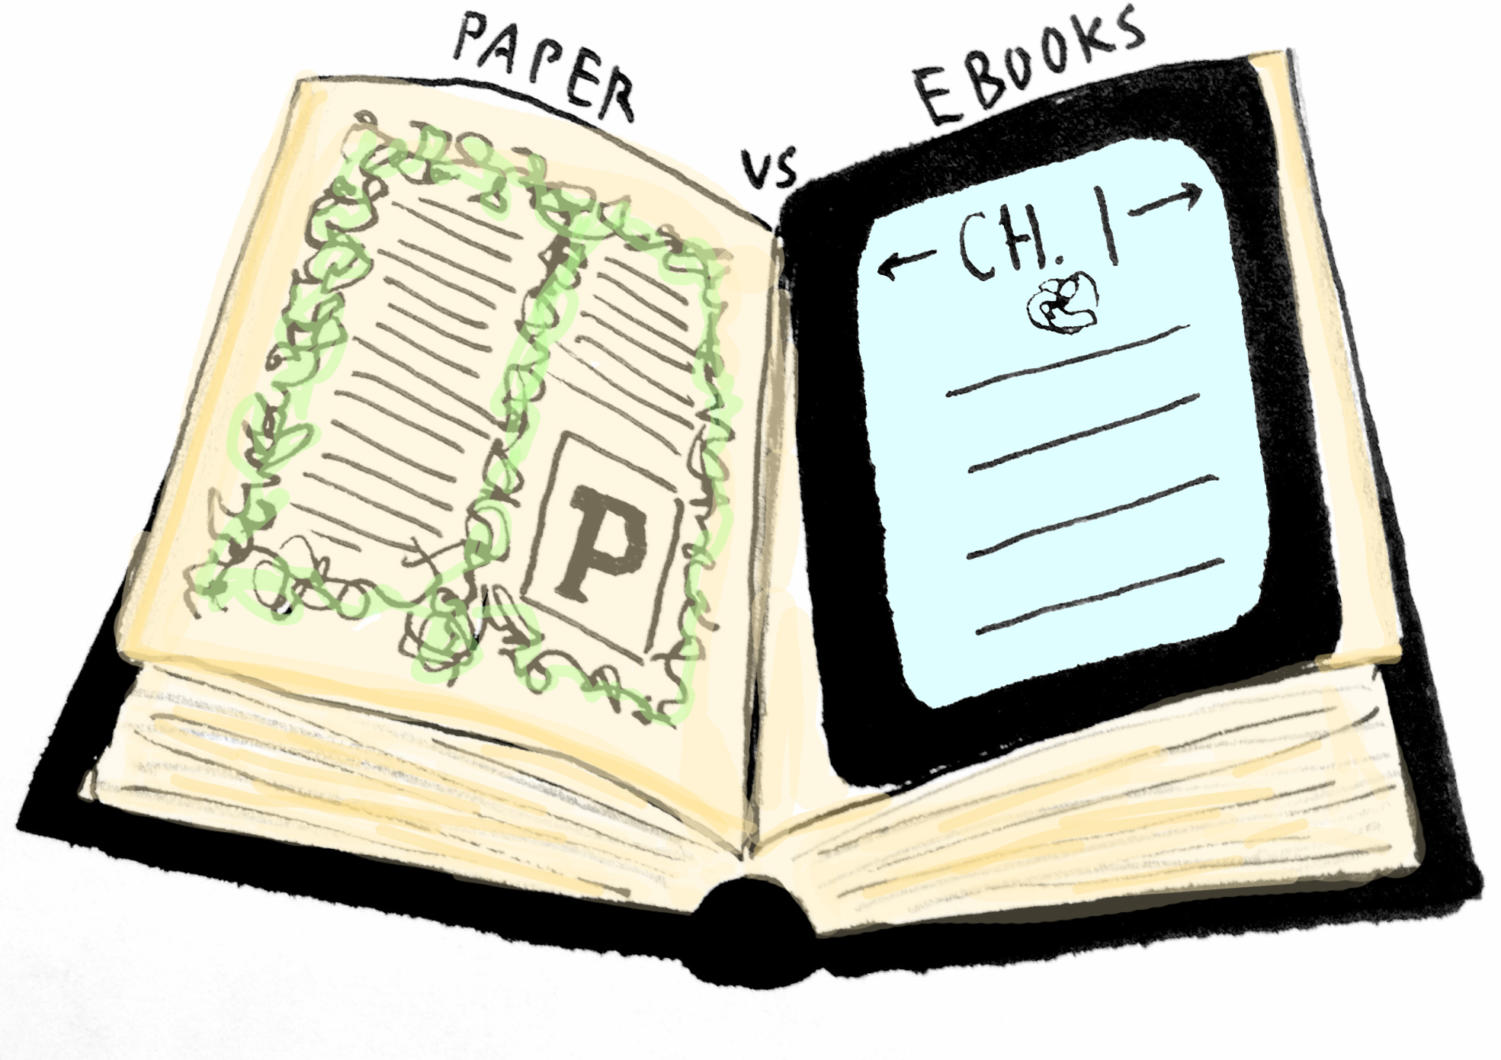 Do we prefer paper to e-books? - Two Sides